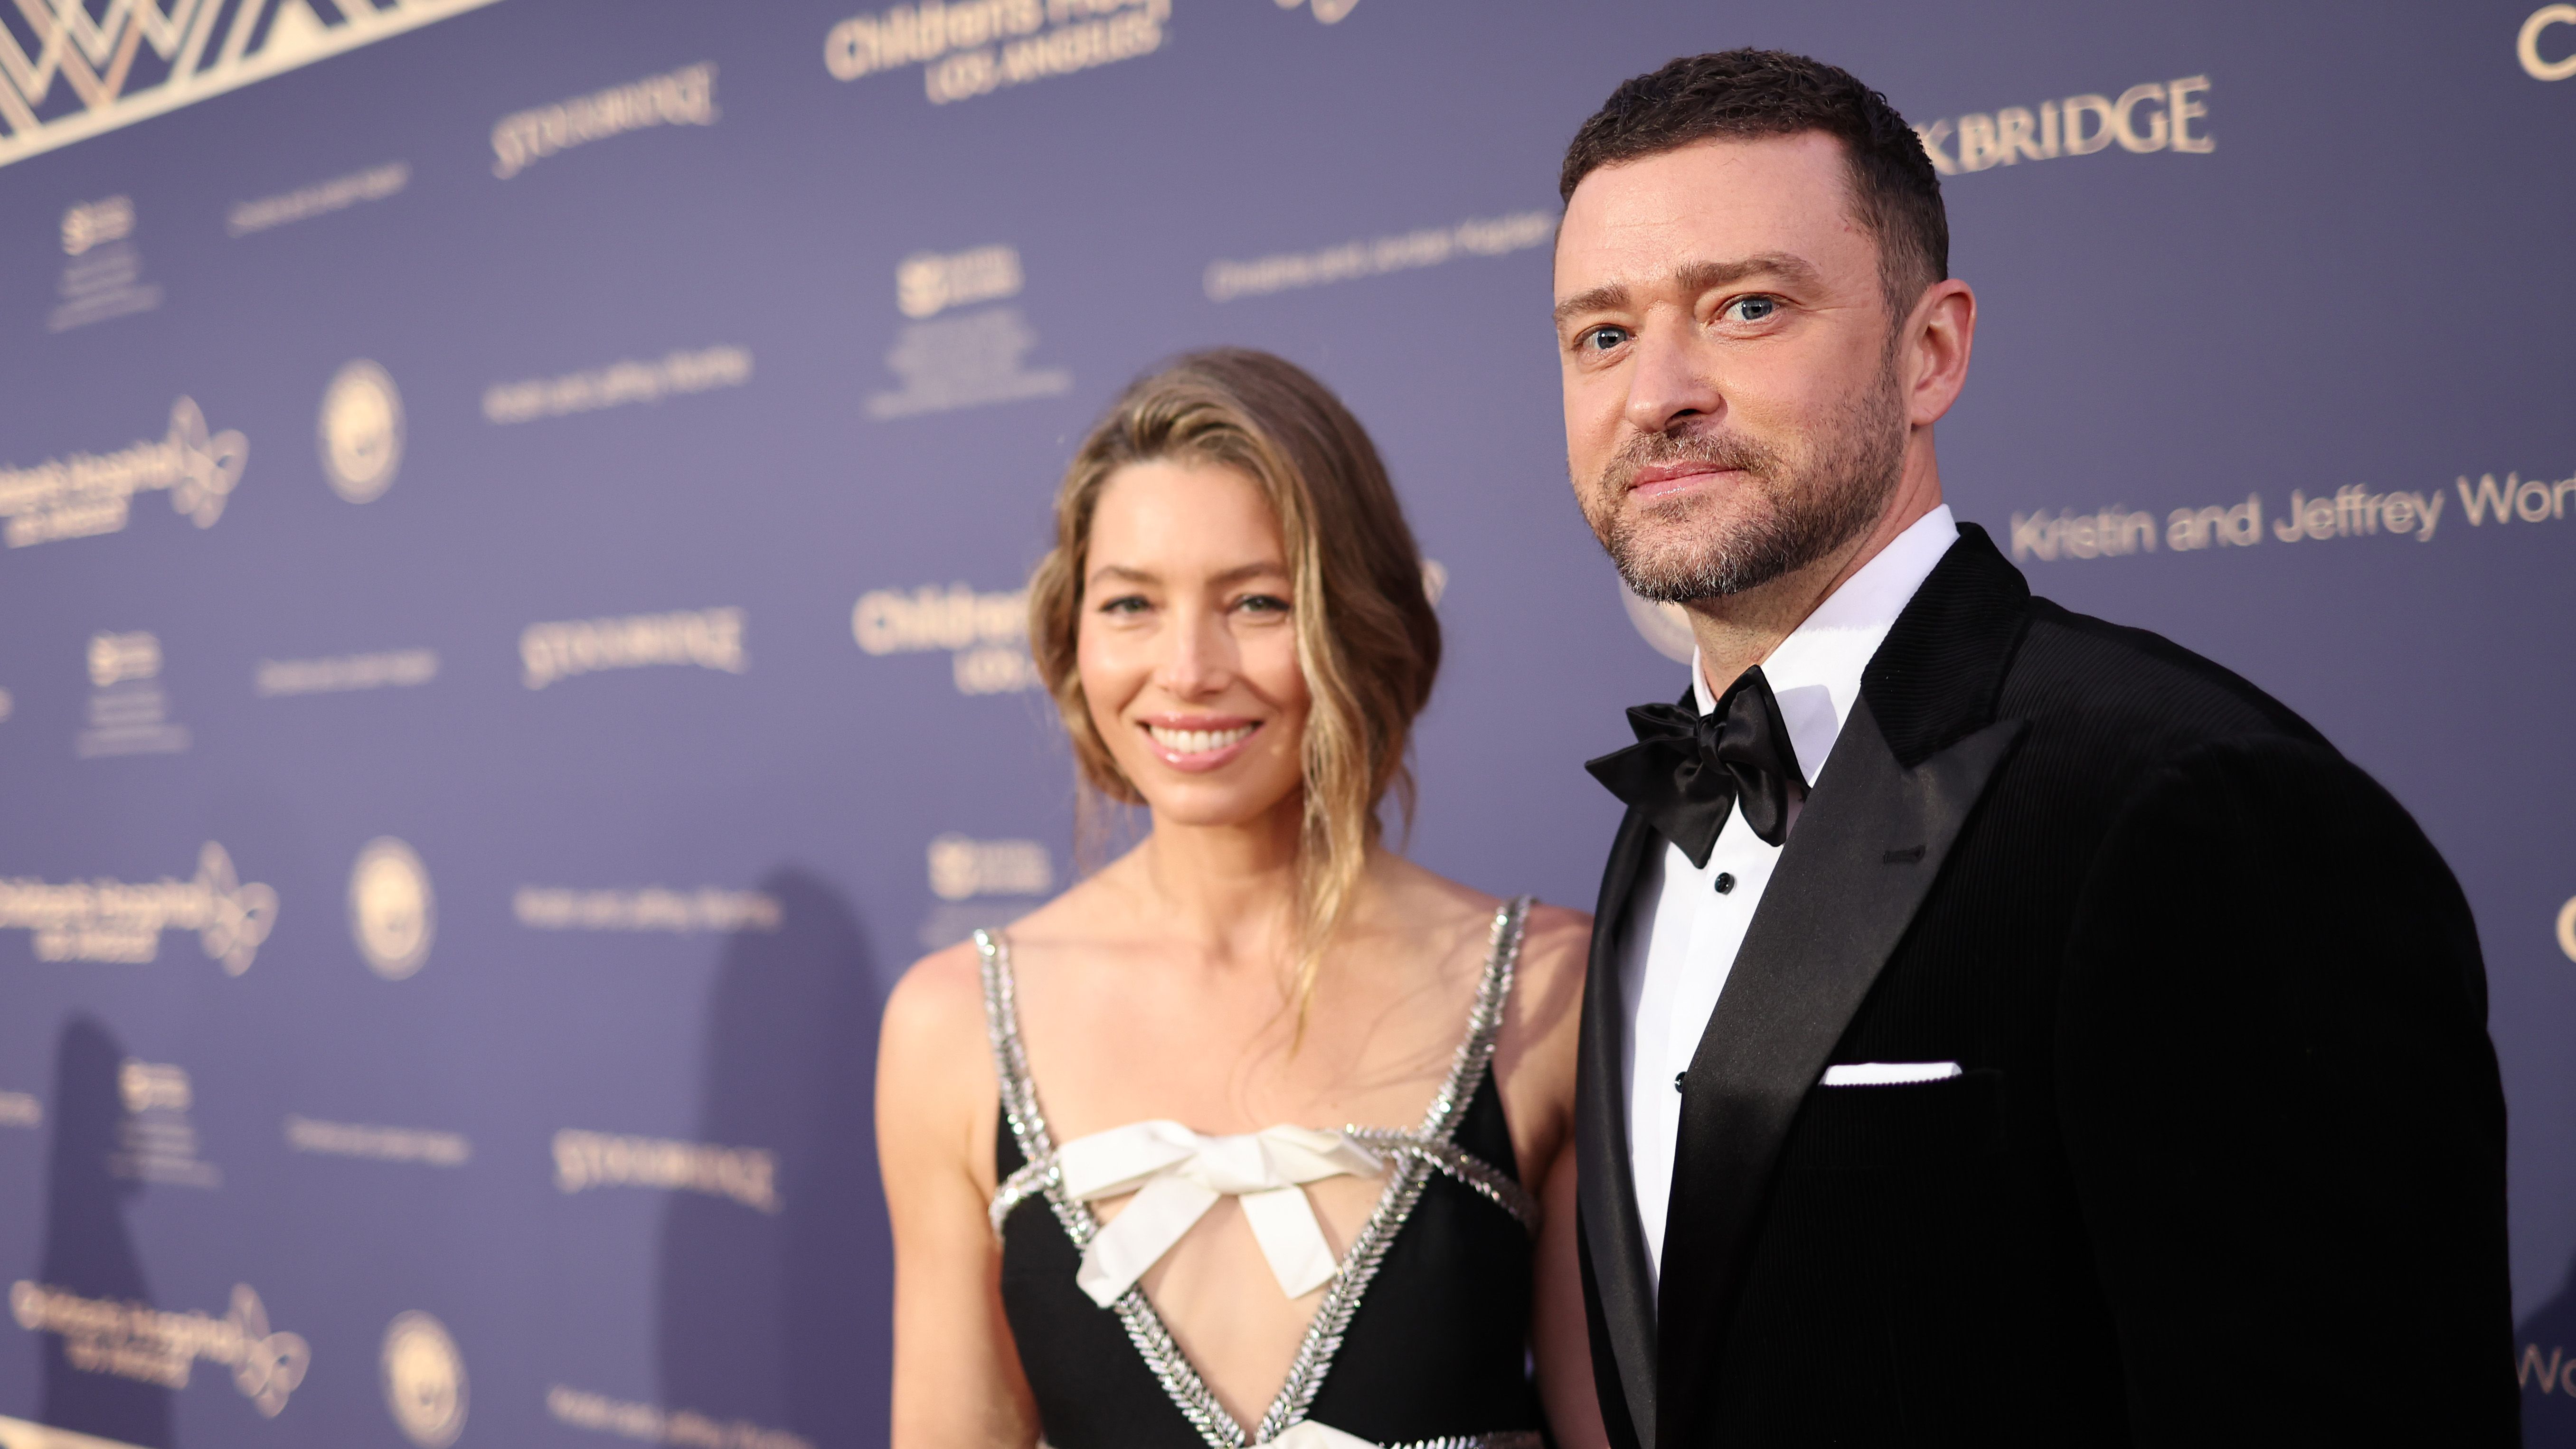 All About Justin Timberlake and Jessica Biel's 2 Kids